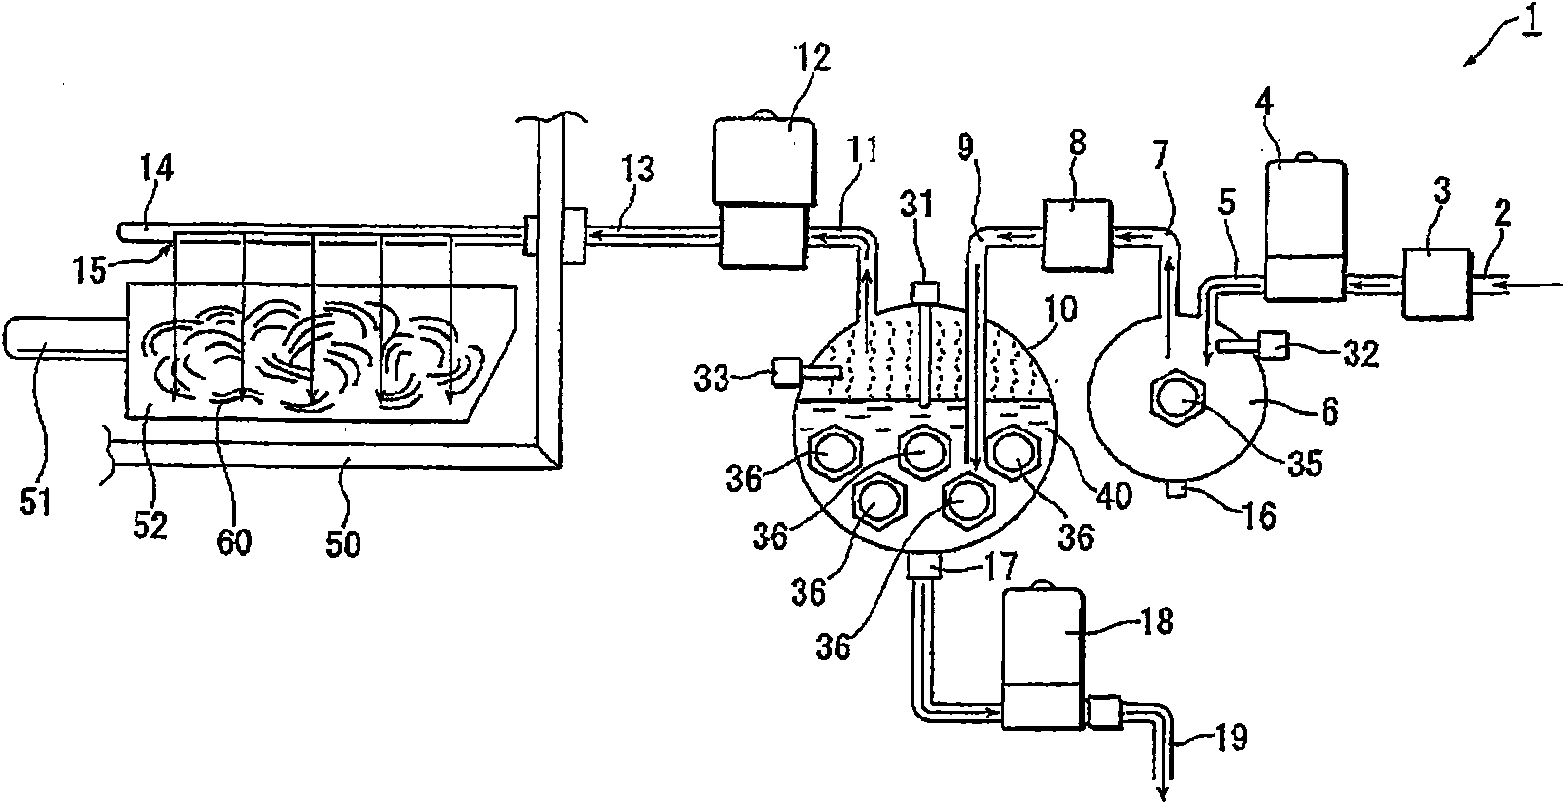 Frozen food thawing device